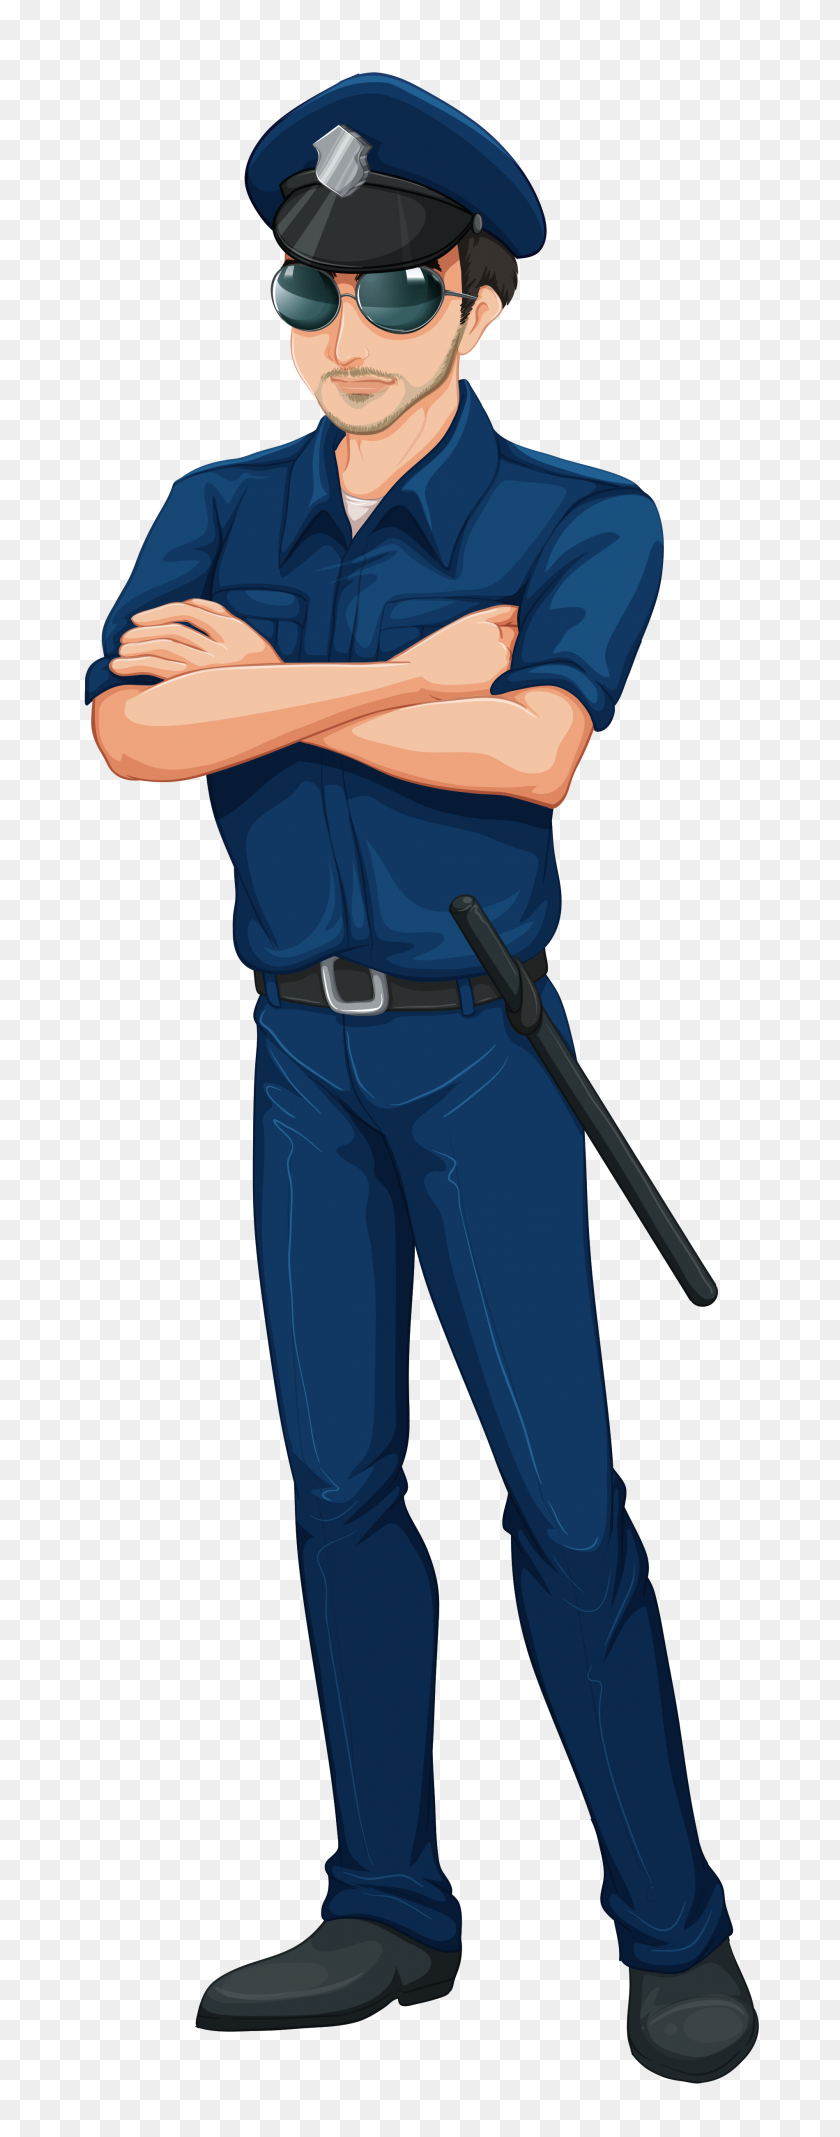 1899x5059 Policeman Png Hd Free Transparent Policeman Hd Images - Police Officer PNG